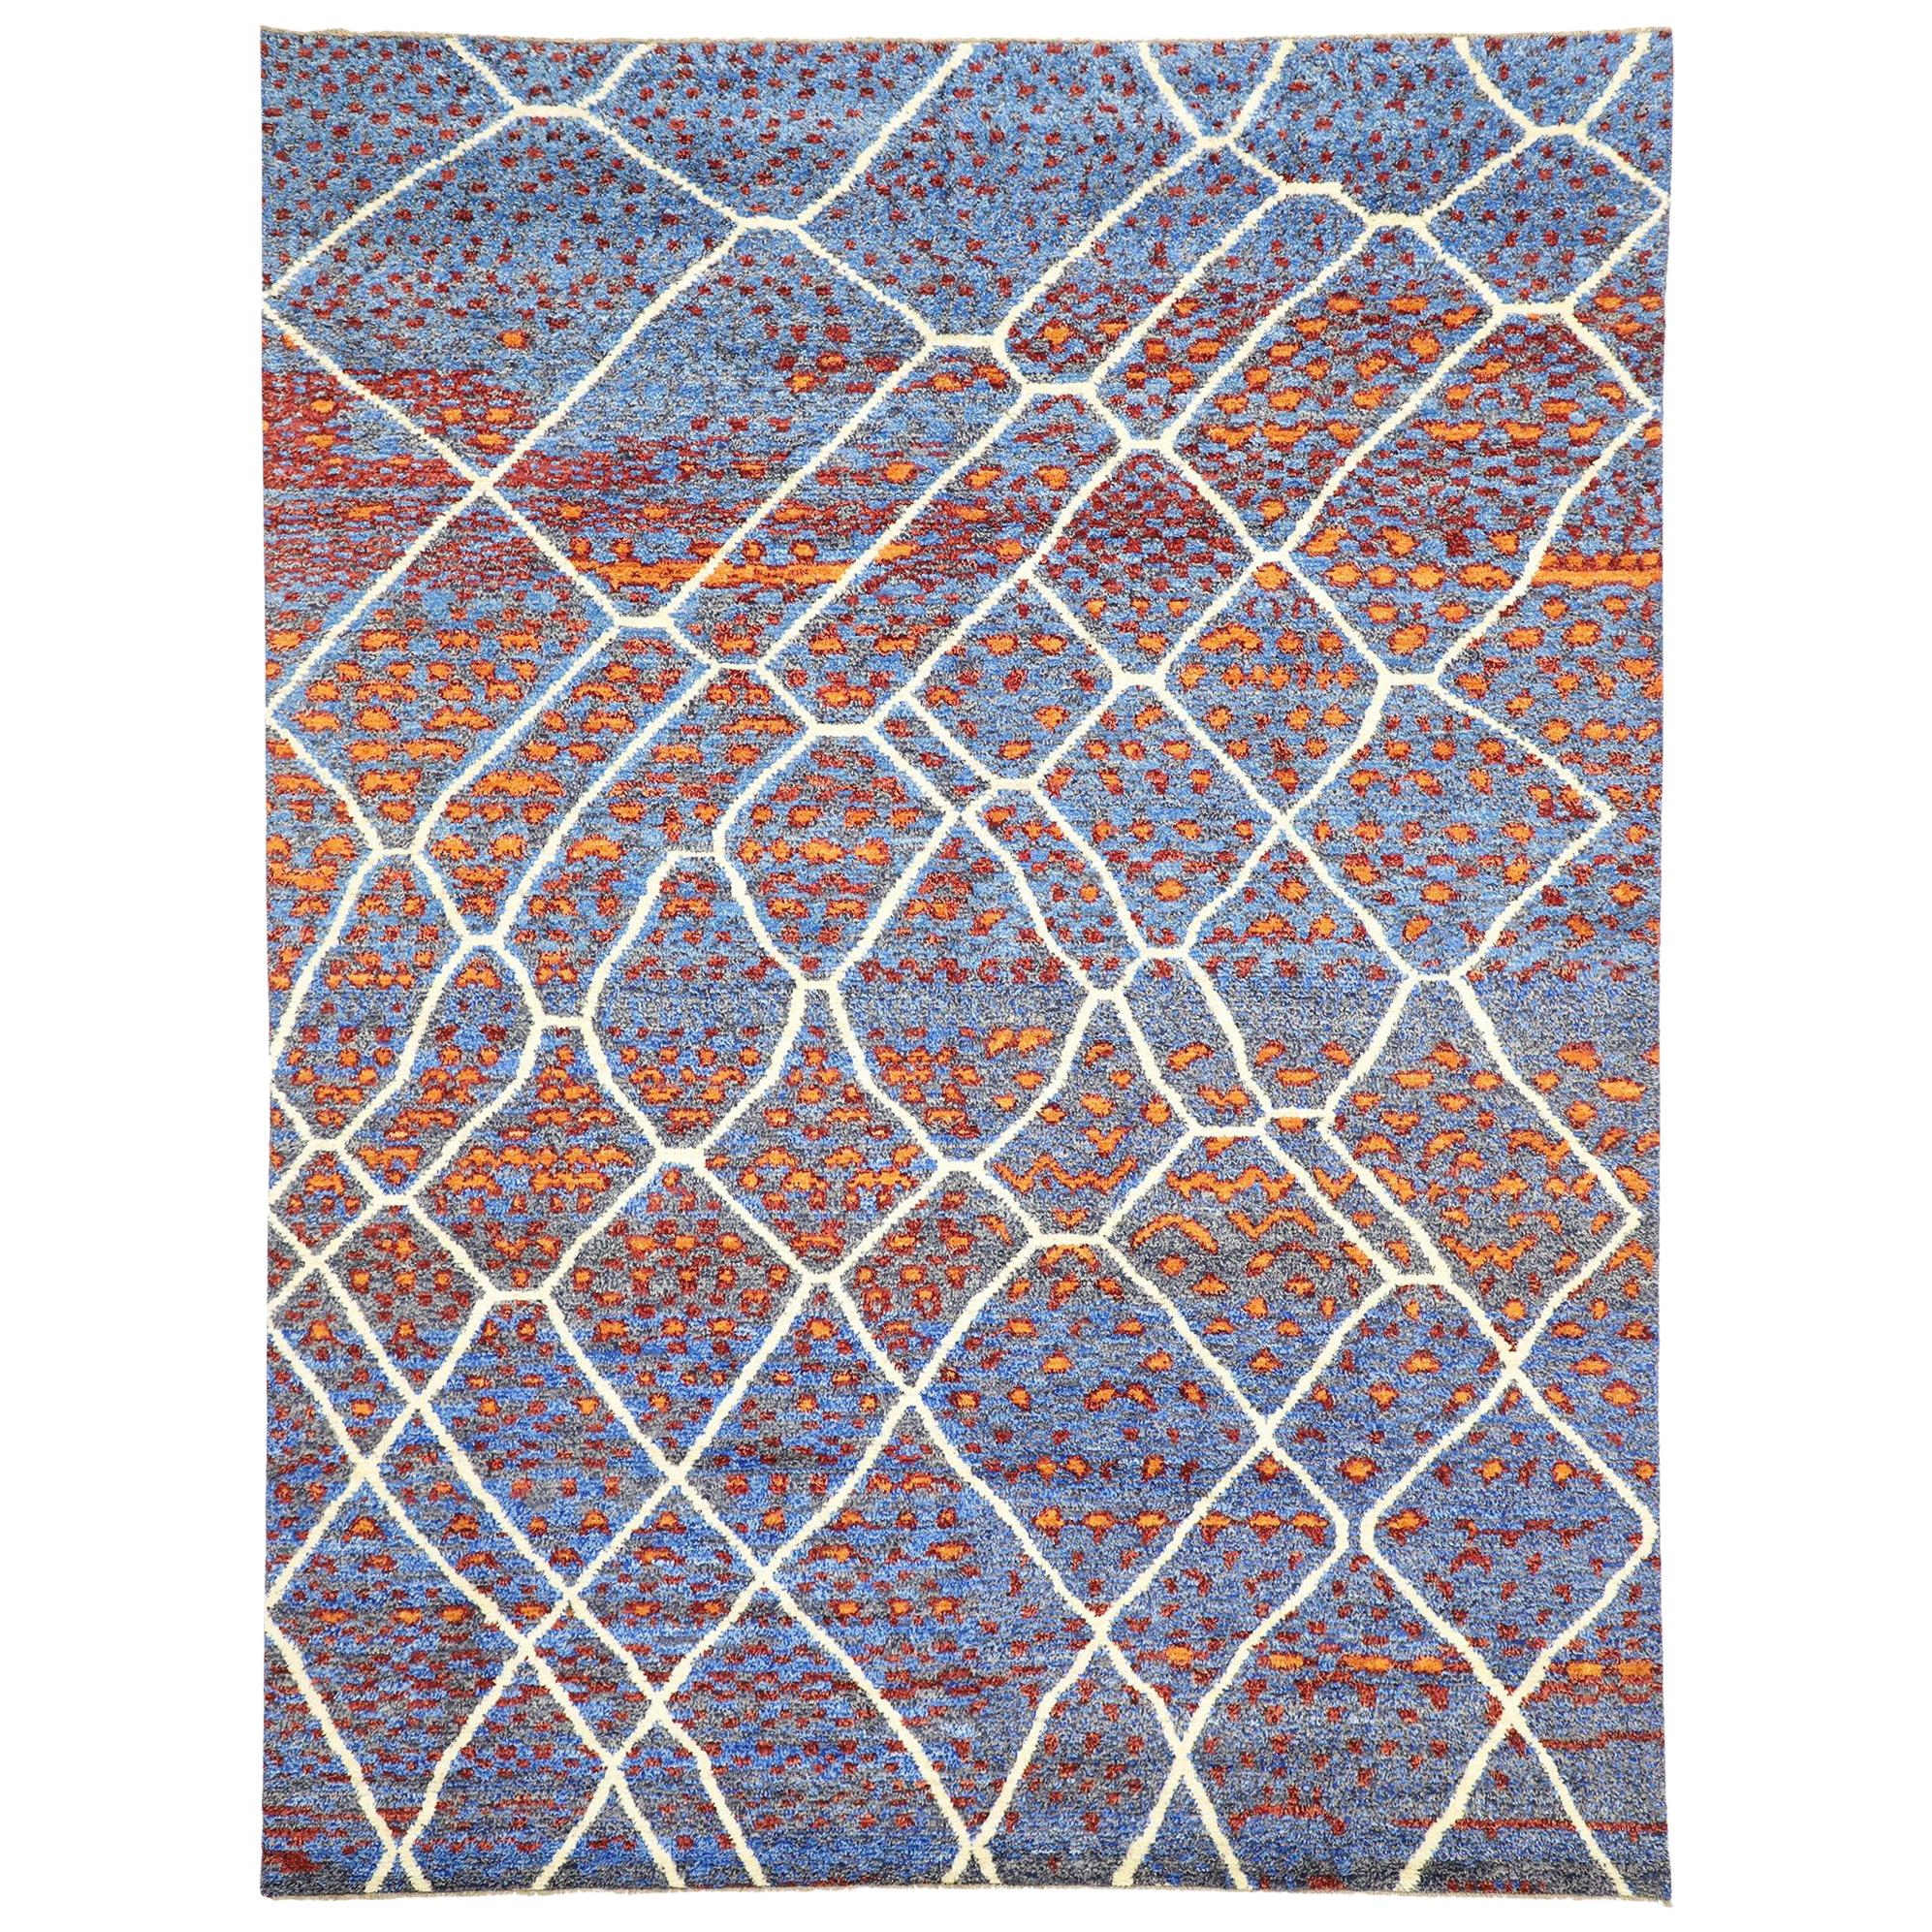 New Contemporary Moroccan Area Rug with Postmodern Style